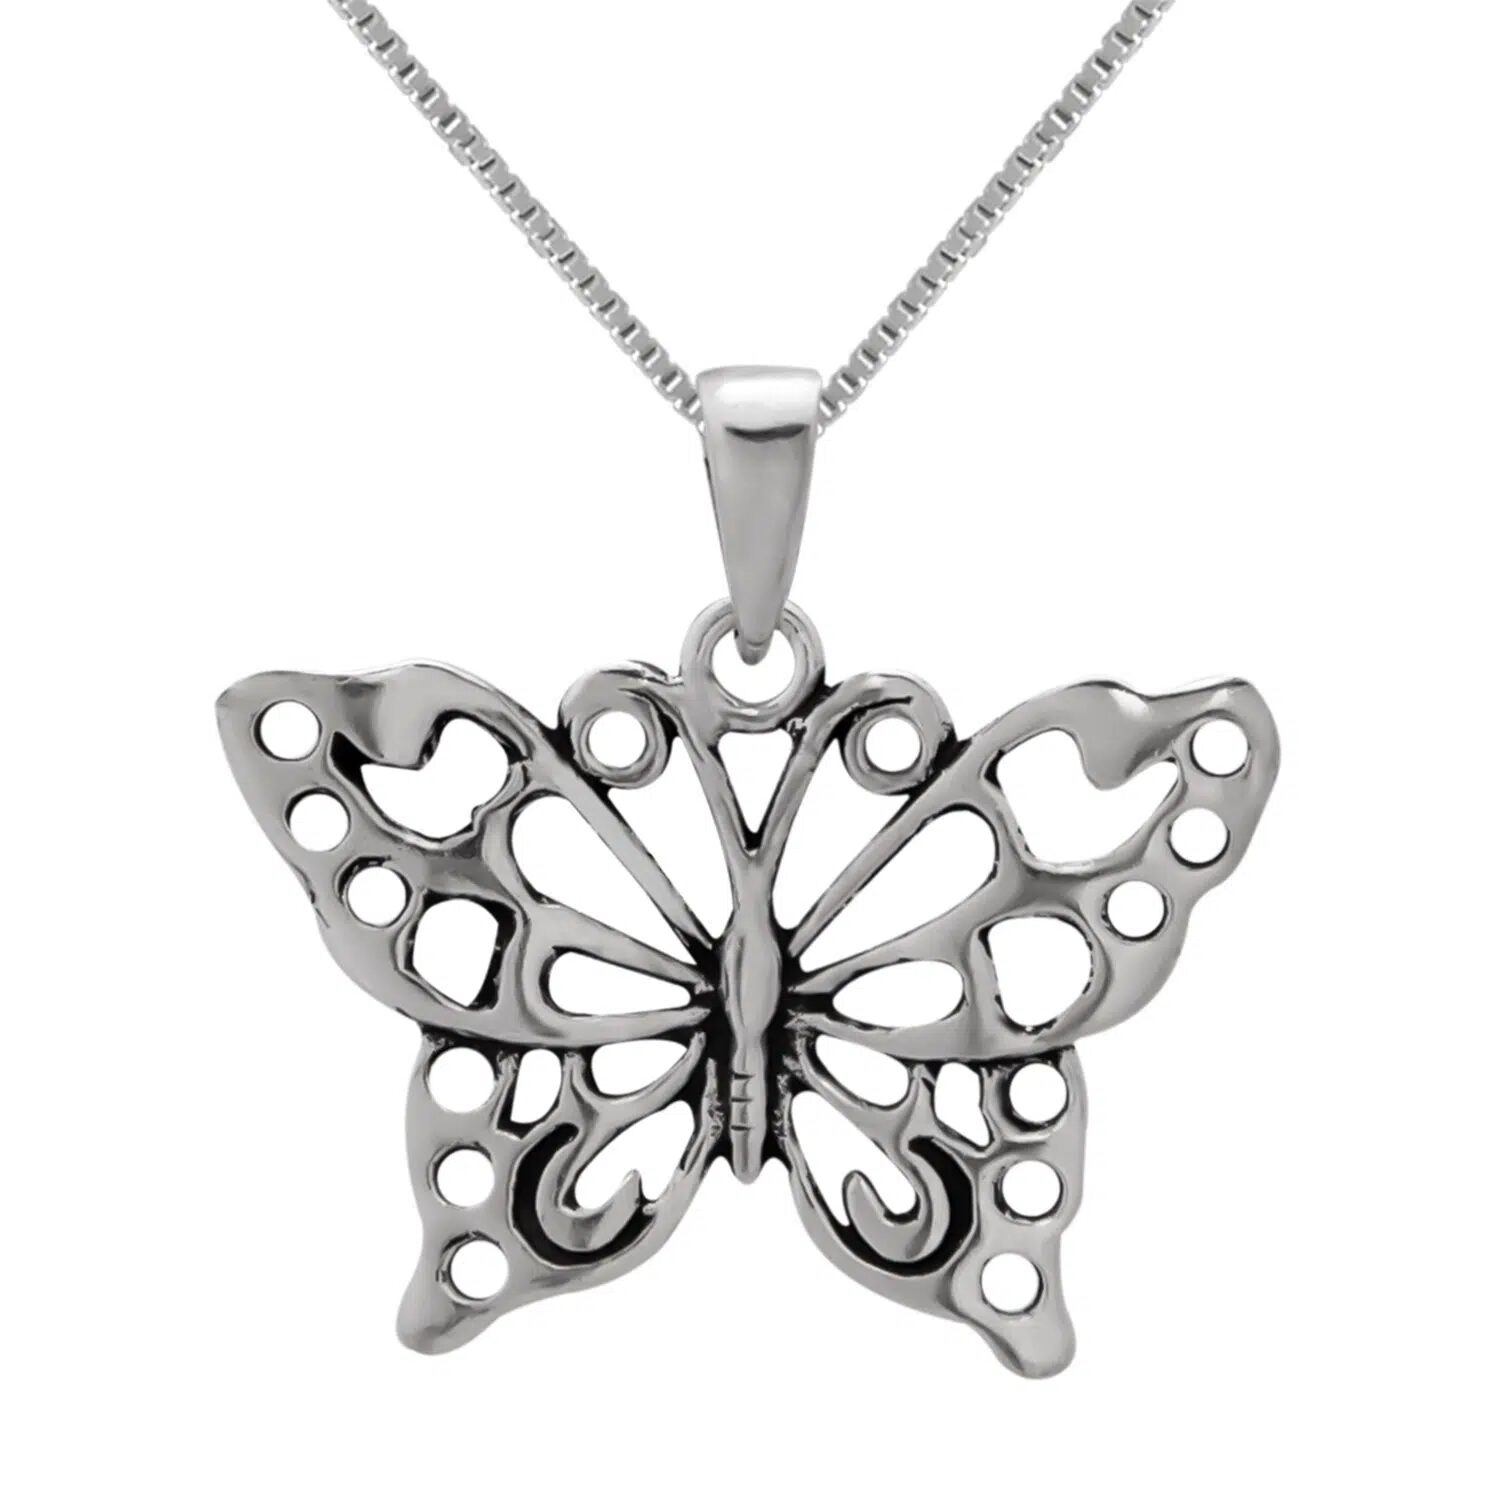 Tips for Styling Your Silver Pendant Necklace - The Katy News